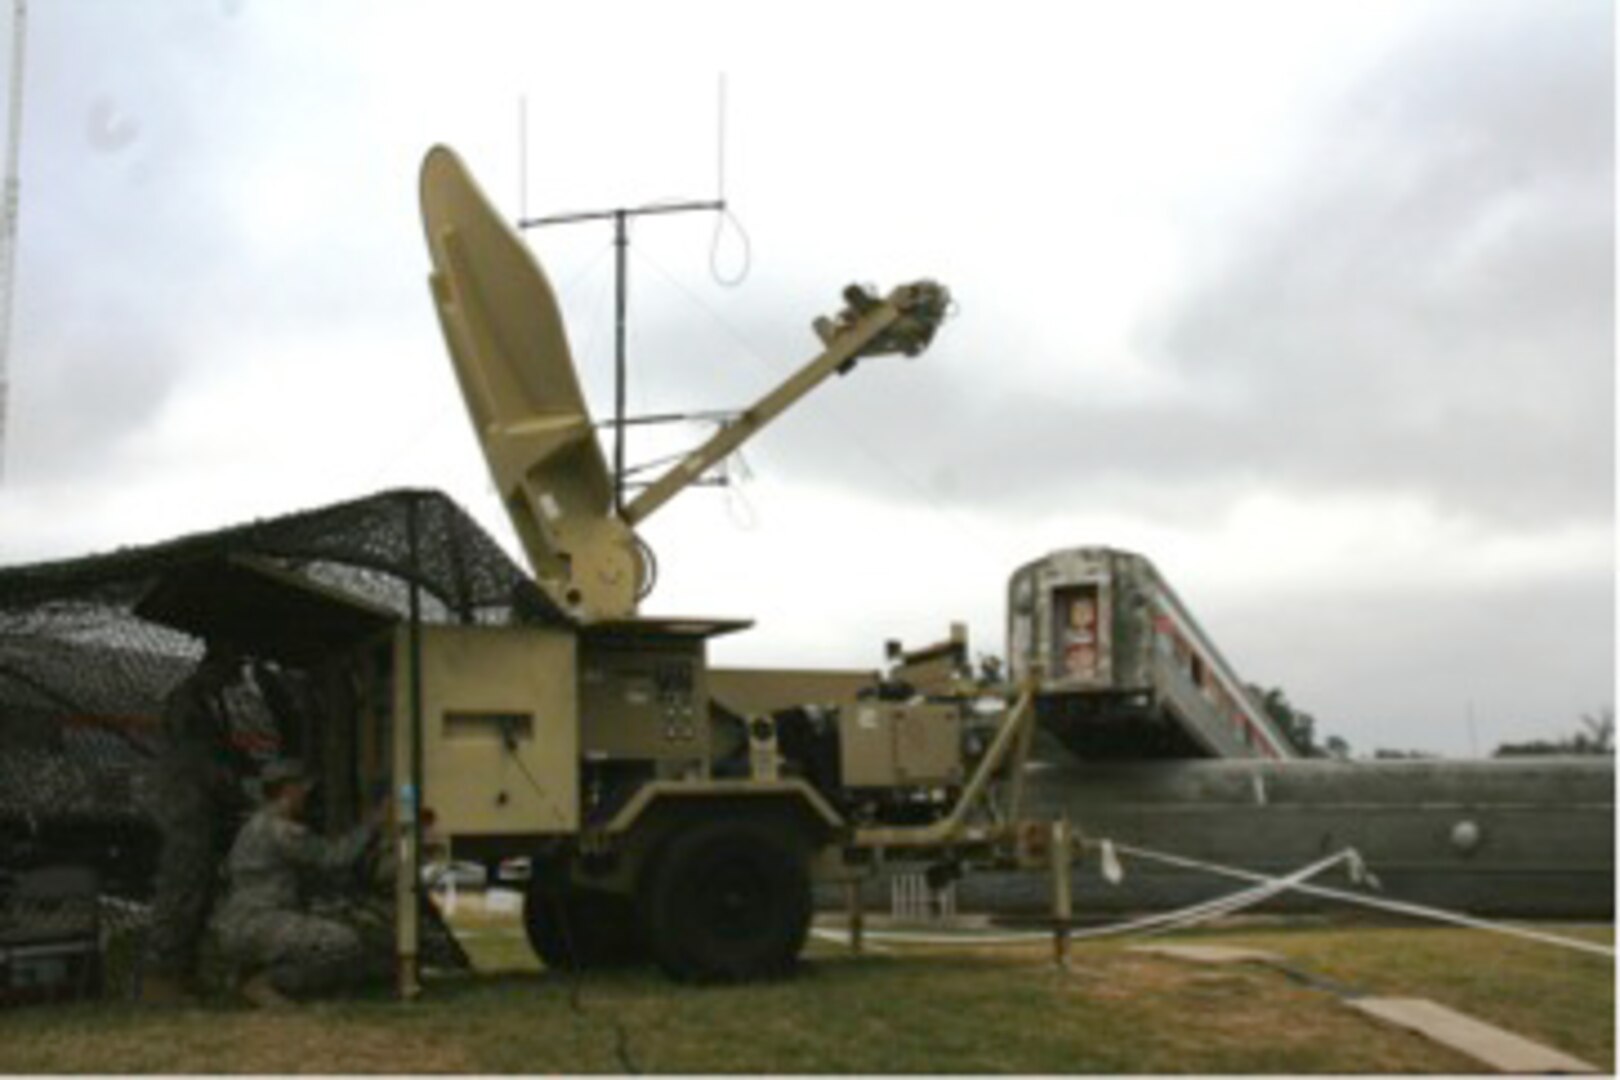 This Satellite Transportable Terminal (STT) and 4G LTE Cellular/Wireless transmission antenna in the background are part of the Disaster Incident Response Emergency Communications Terminal (DIRECT) equipment package that is being fielded to the Army National Guard to provide collaboration and communication services at incident sites that link local responders and emergency managers with state and federal authorities. The system was demonstrated on Oct. 29, 2014, in College Station Texas at Texas A&M Engineering Extension Services’ Disaster City, a realistic disaster environment that supports training exercises and testing of new equipment for first responders. 